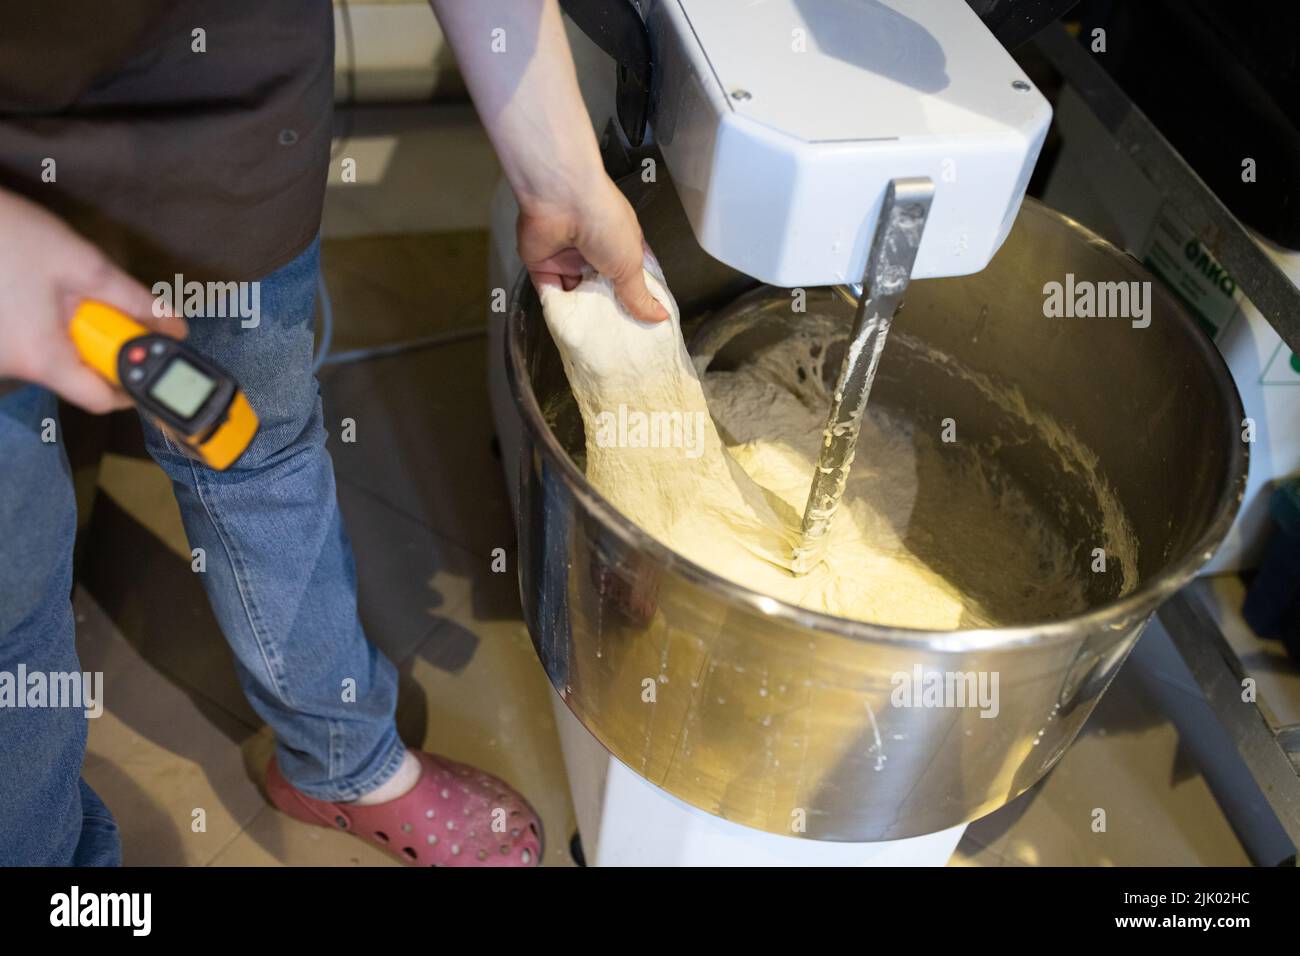 https://c8.alamy.com/comp/2JK02HC/the-baker-kneads-bread-in-a-dough-mixer-the-process-of-making-bread-in-an-artisan-bakery-measuring-the-temperature-of-the-dough-front-view-2JK02HC.jpg